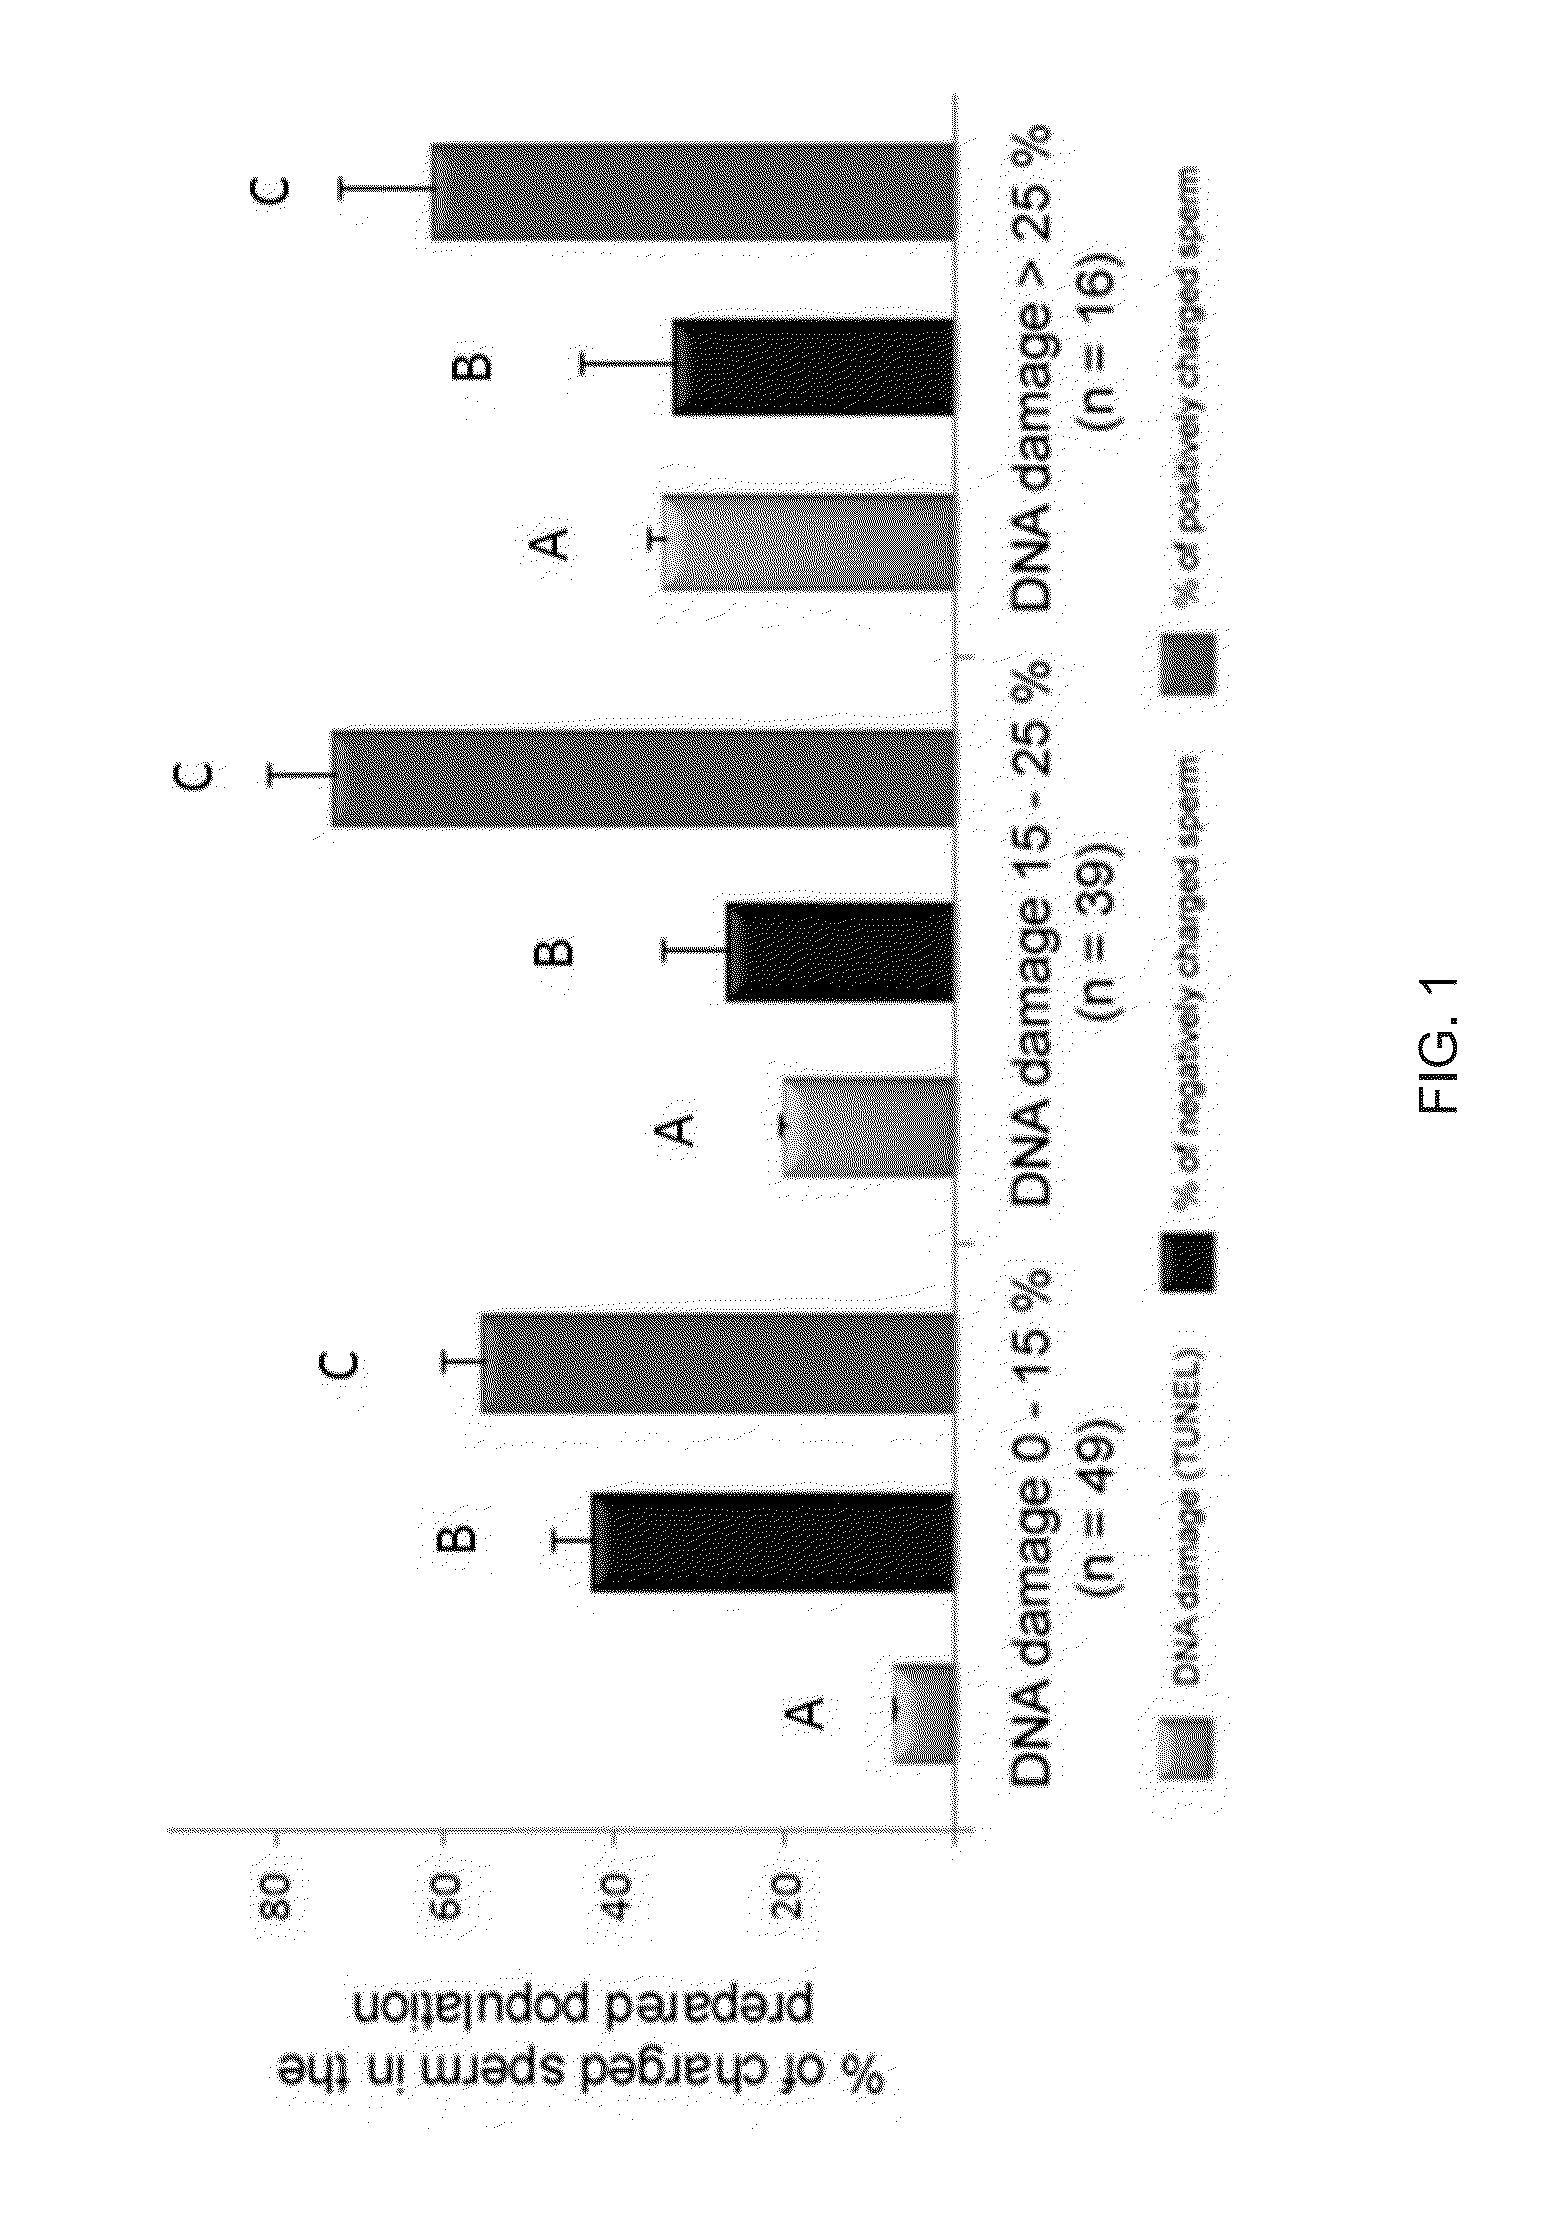 Sperm separation devices and associated methods